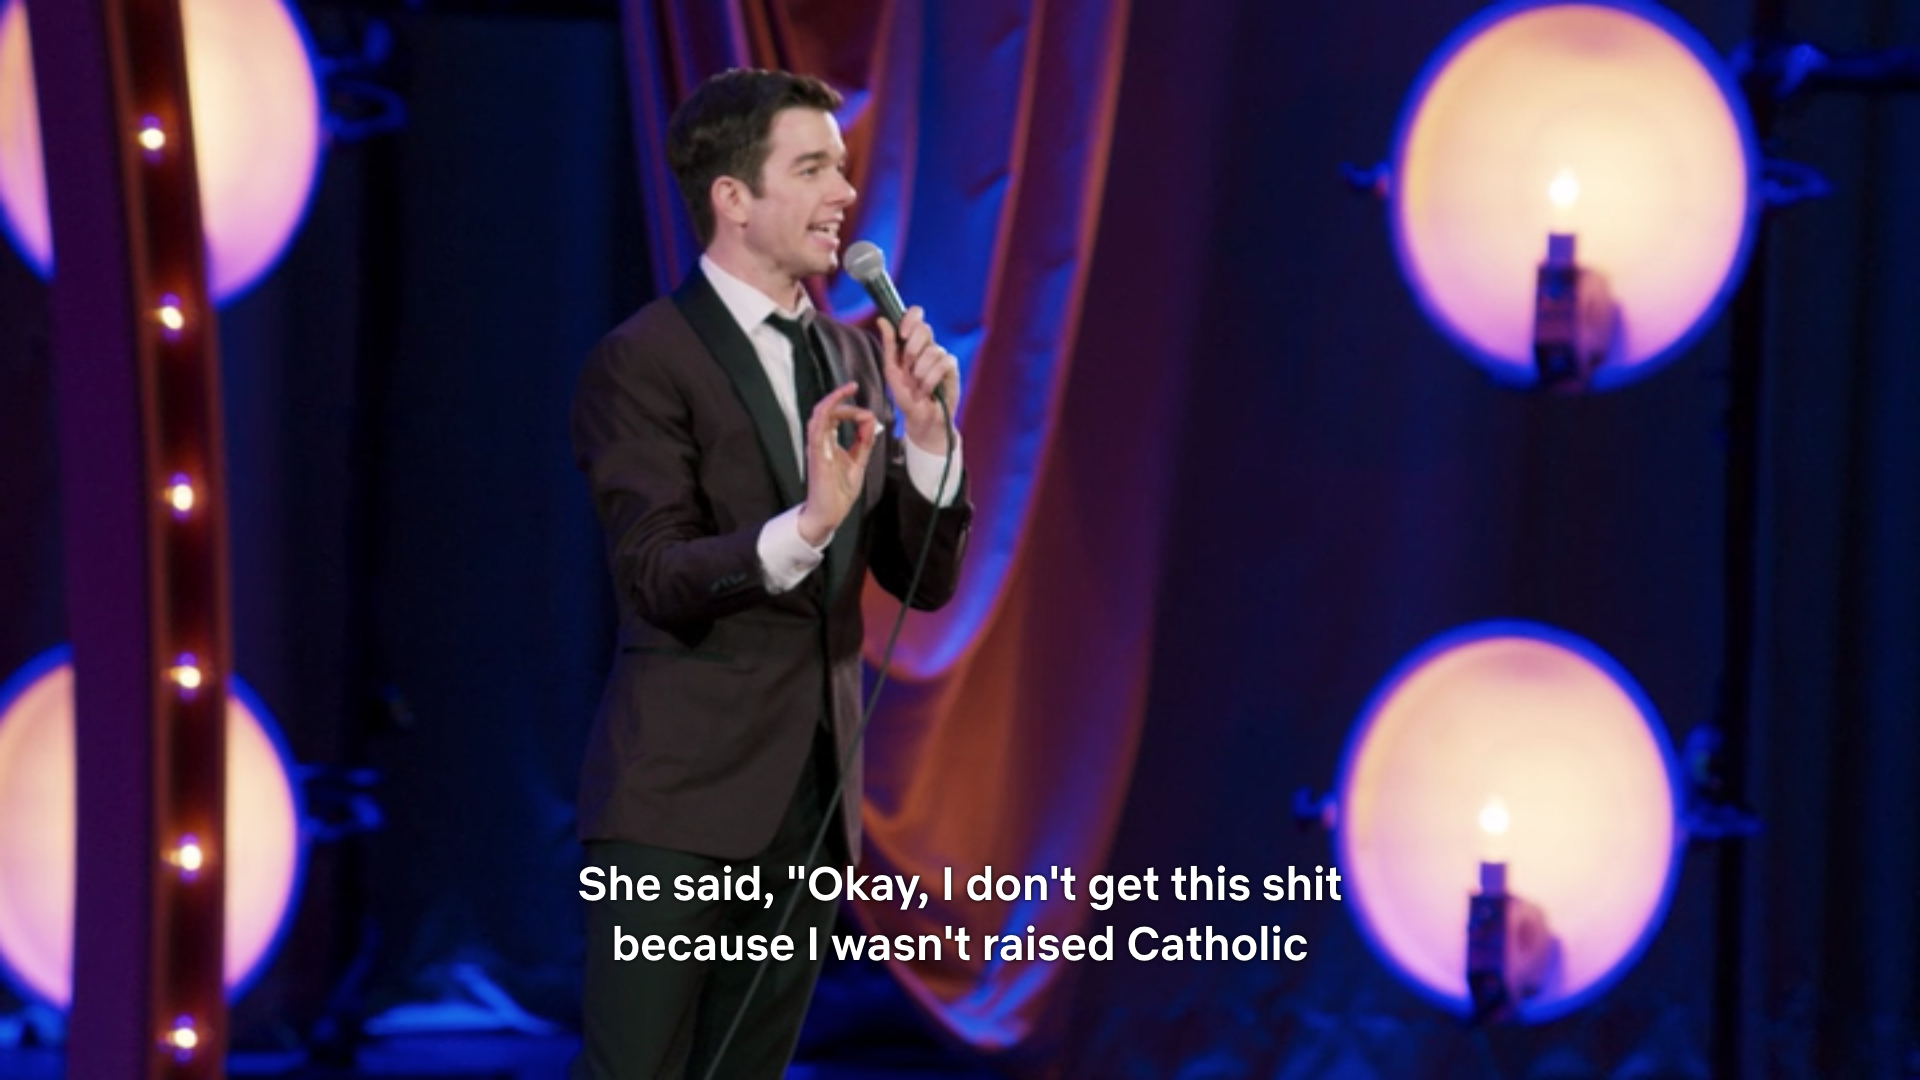 The Best Part of John Mulaney's Stand-Up is His Jewish Wife Jokes - Hey Alma